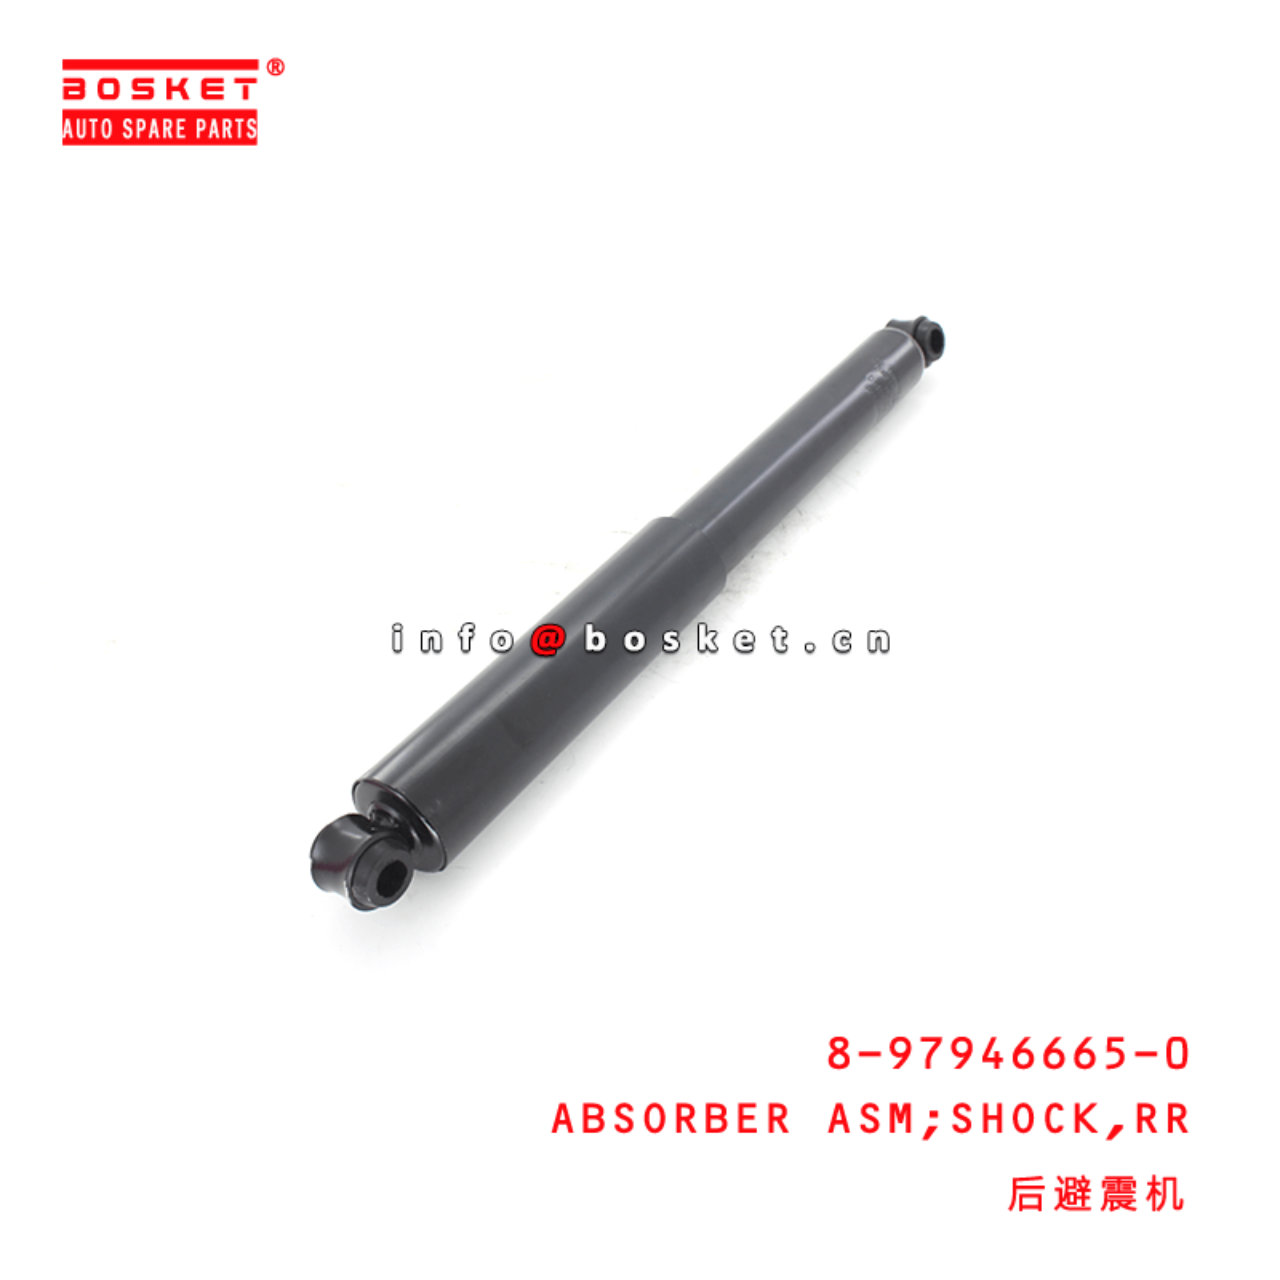 8-97946665-0 Rear Shock Absorber Assembly 8979466650 Suitable for ISUZU DMAX